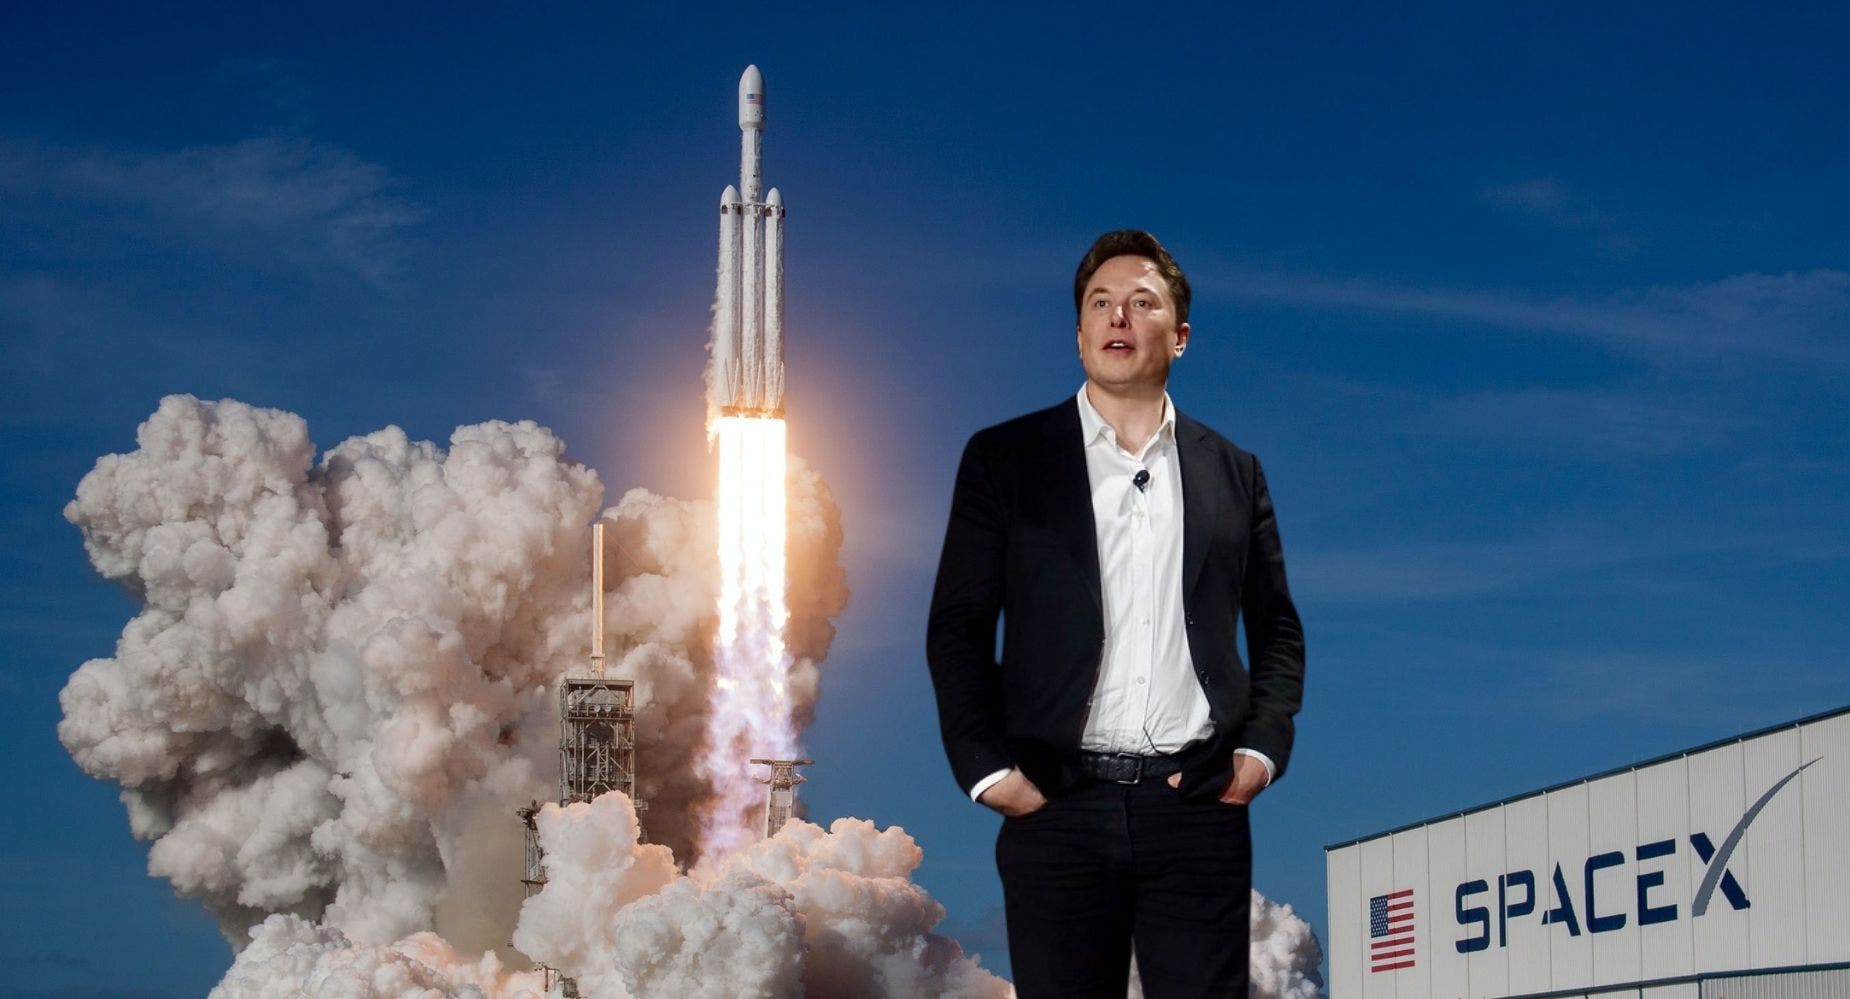 Elon Musk Applauds His SpaceX and Starlink Ventures Accomplishing These Feats